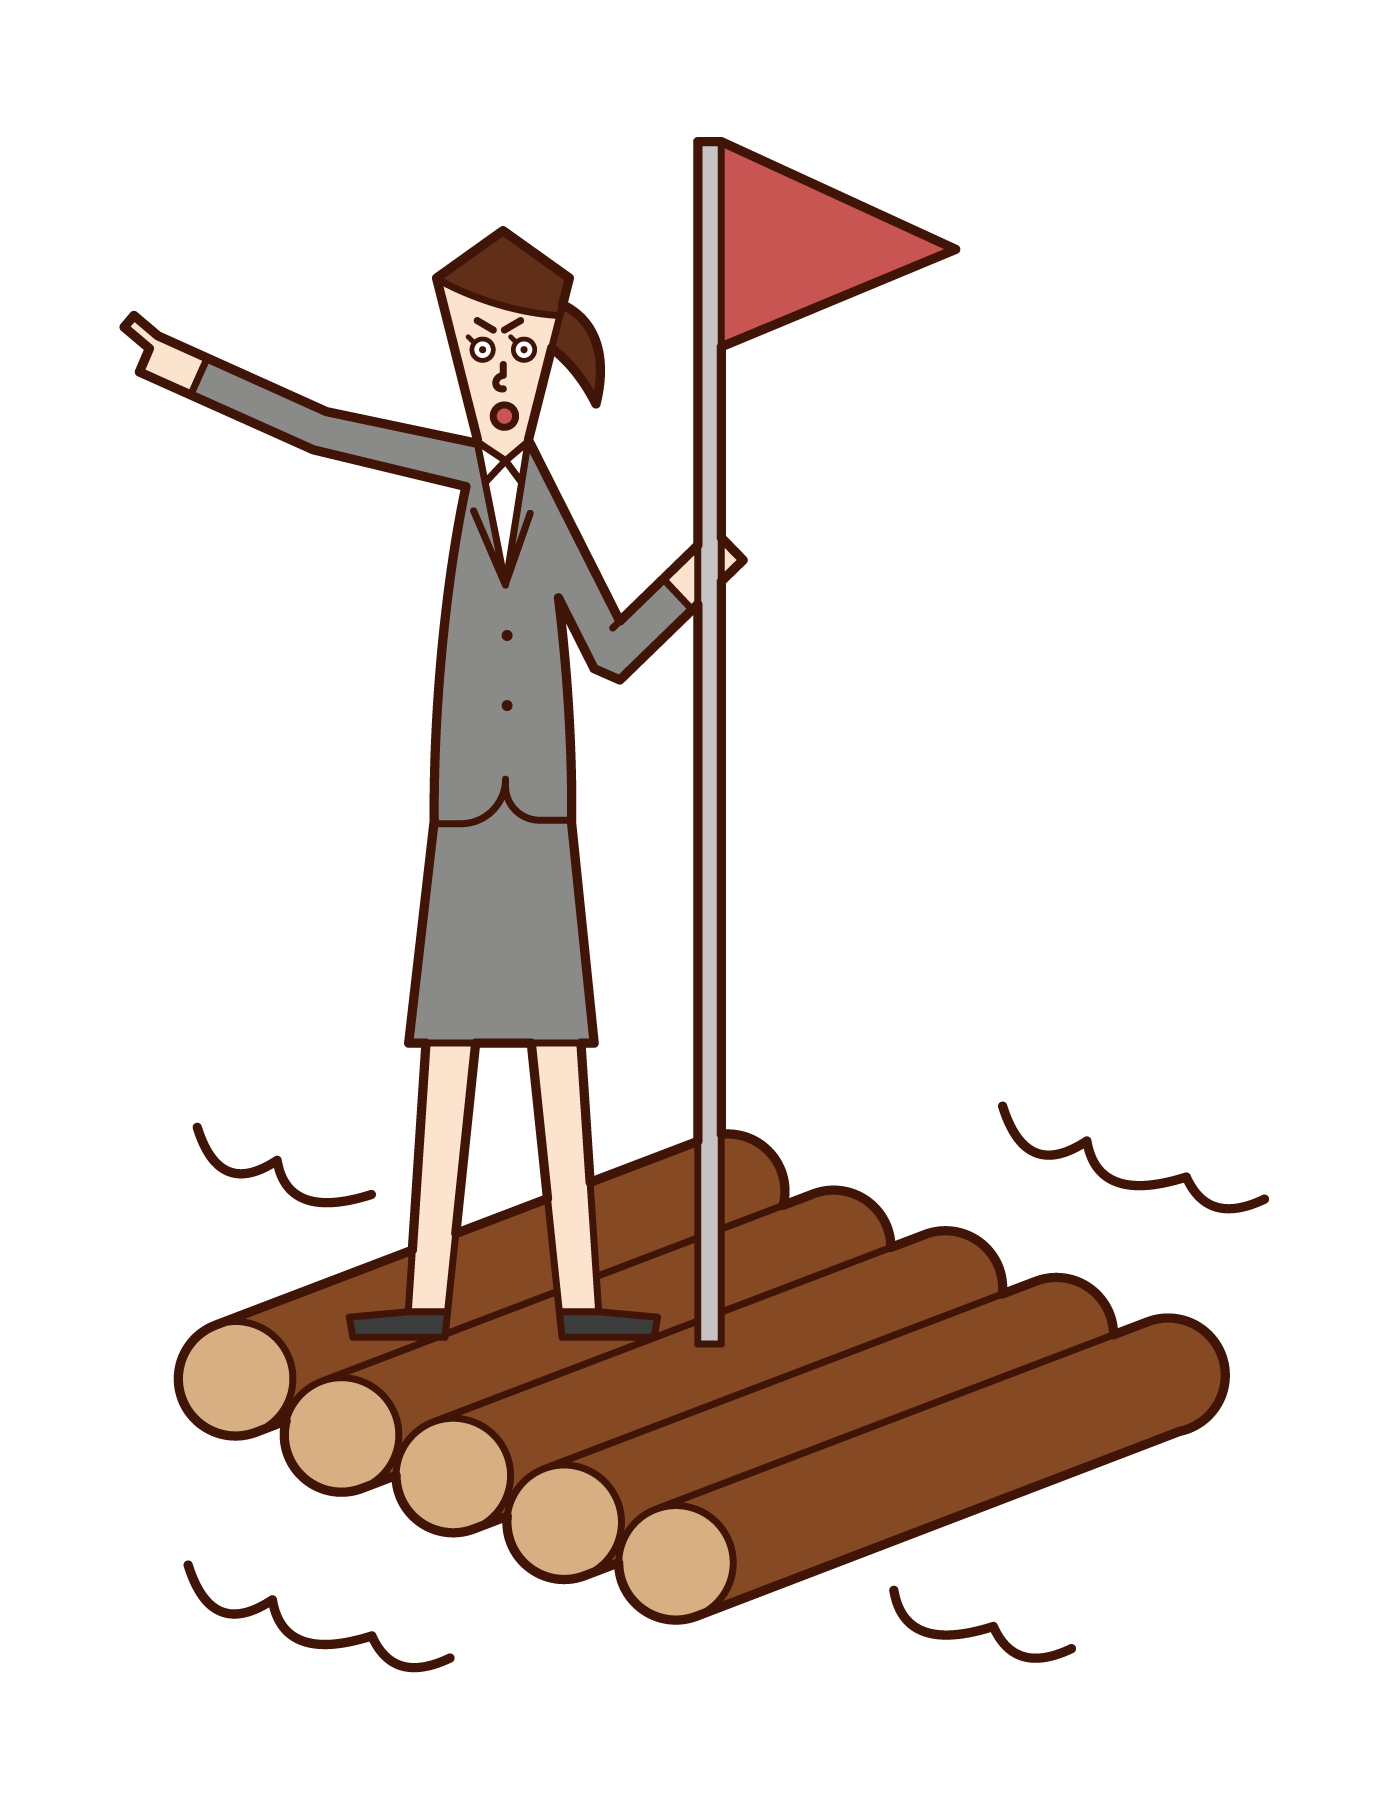 Illustration of a woman on a raft aiming for her destination